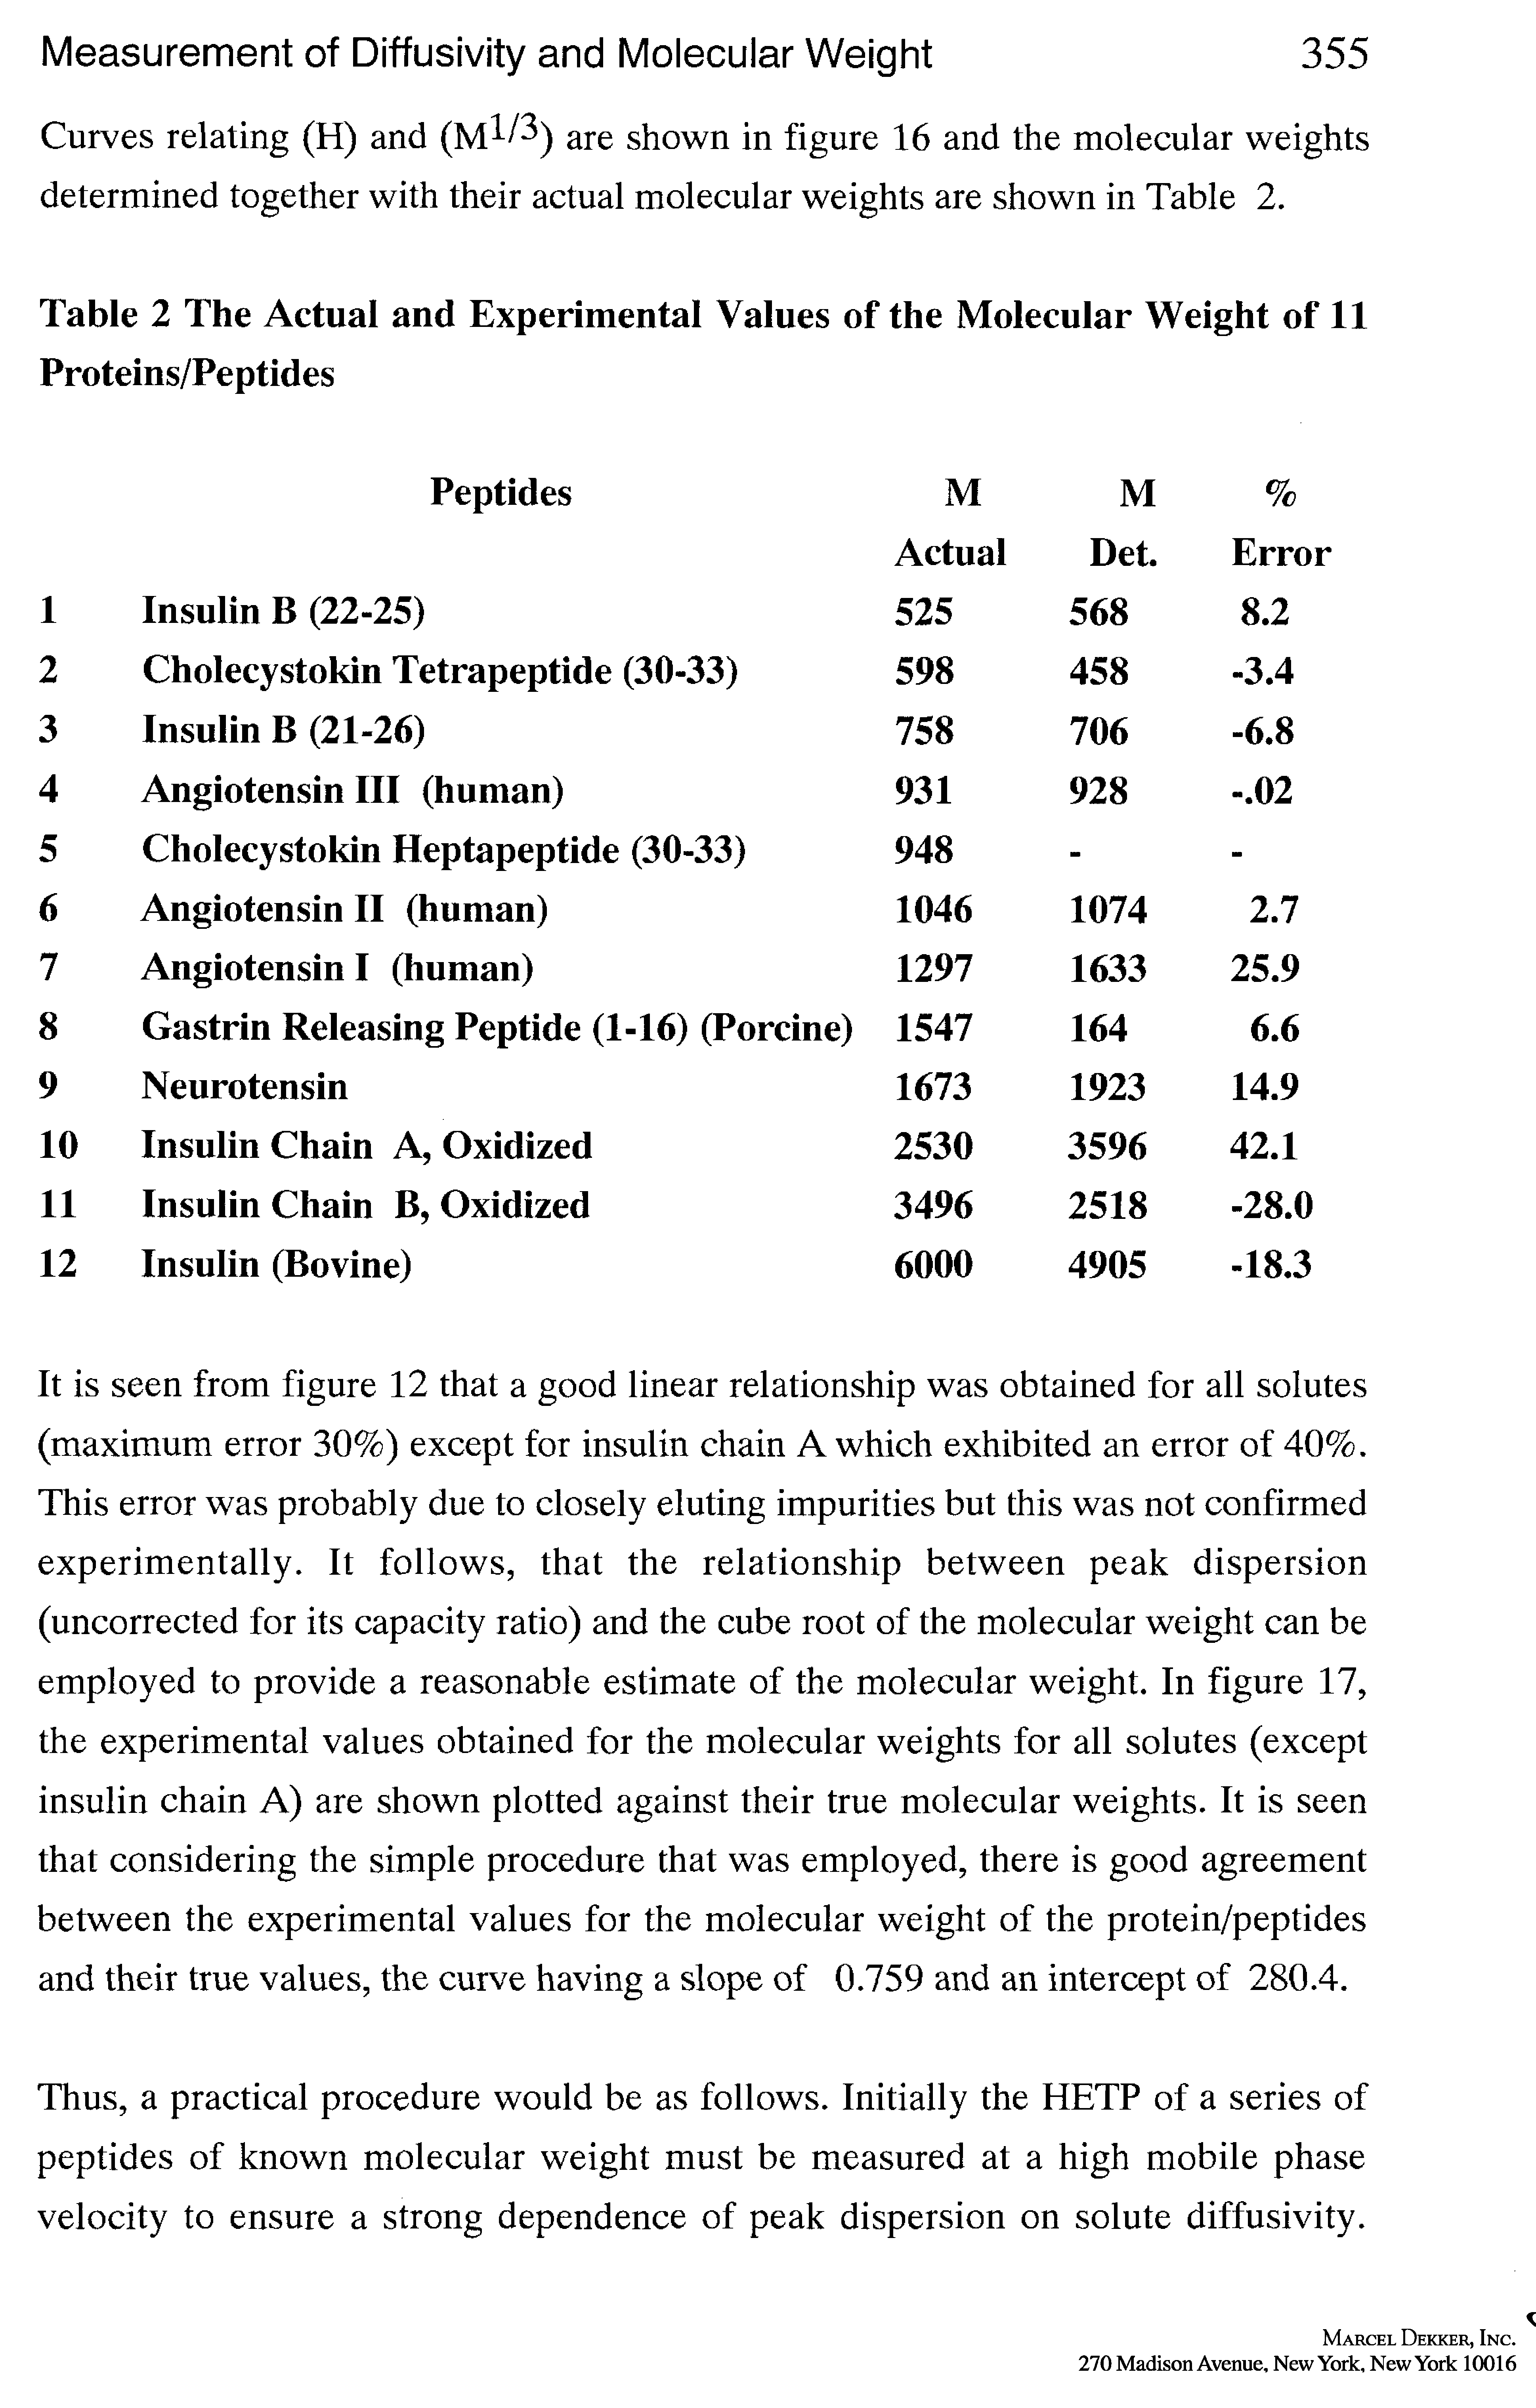 Table 2 The Actual and Experimental Values of the Molecular Weight of 11 Proteins/Peptides...